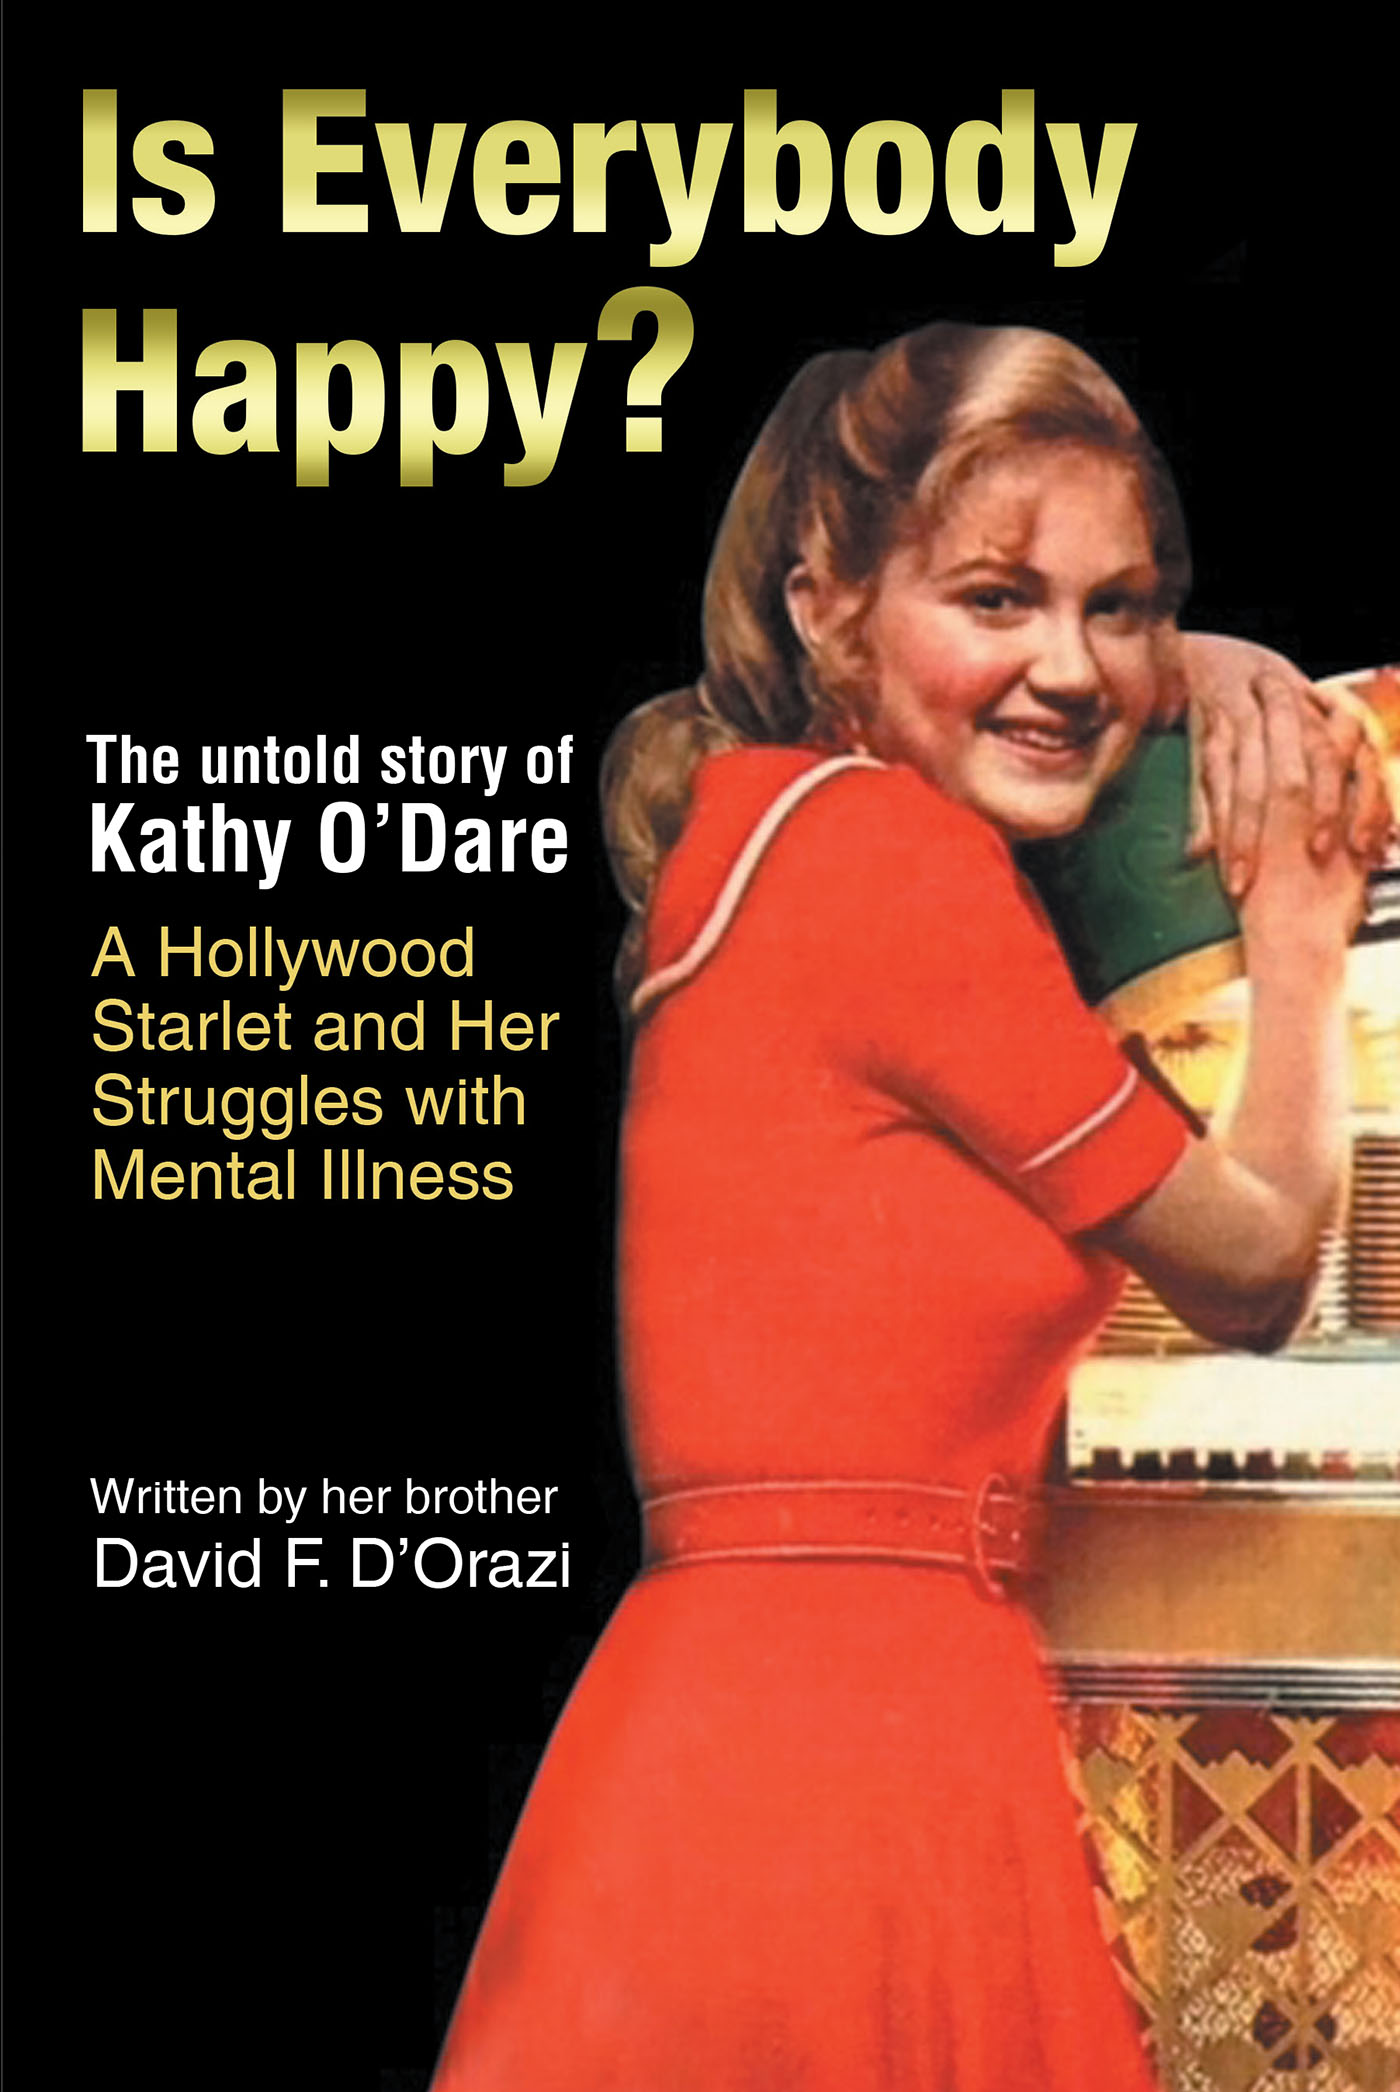 Author David F. D'Orazi’s New Book, “Is Everybody Happy?” Reveals the Turbulent Life the Author's Sister Endured as a Young Rising Hollywood Star with Mental Illness